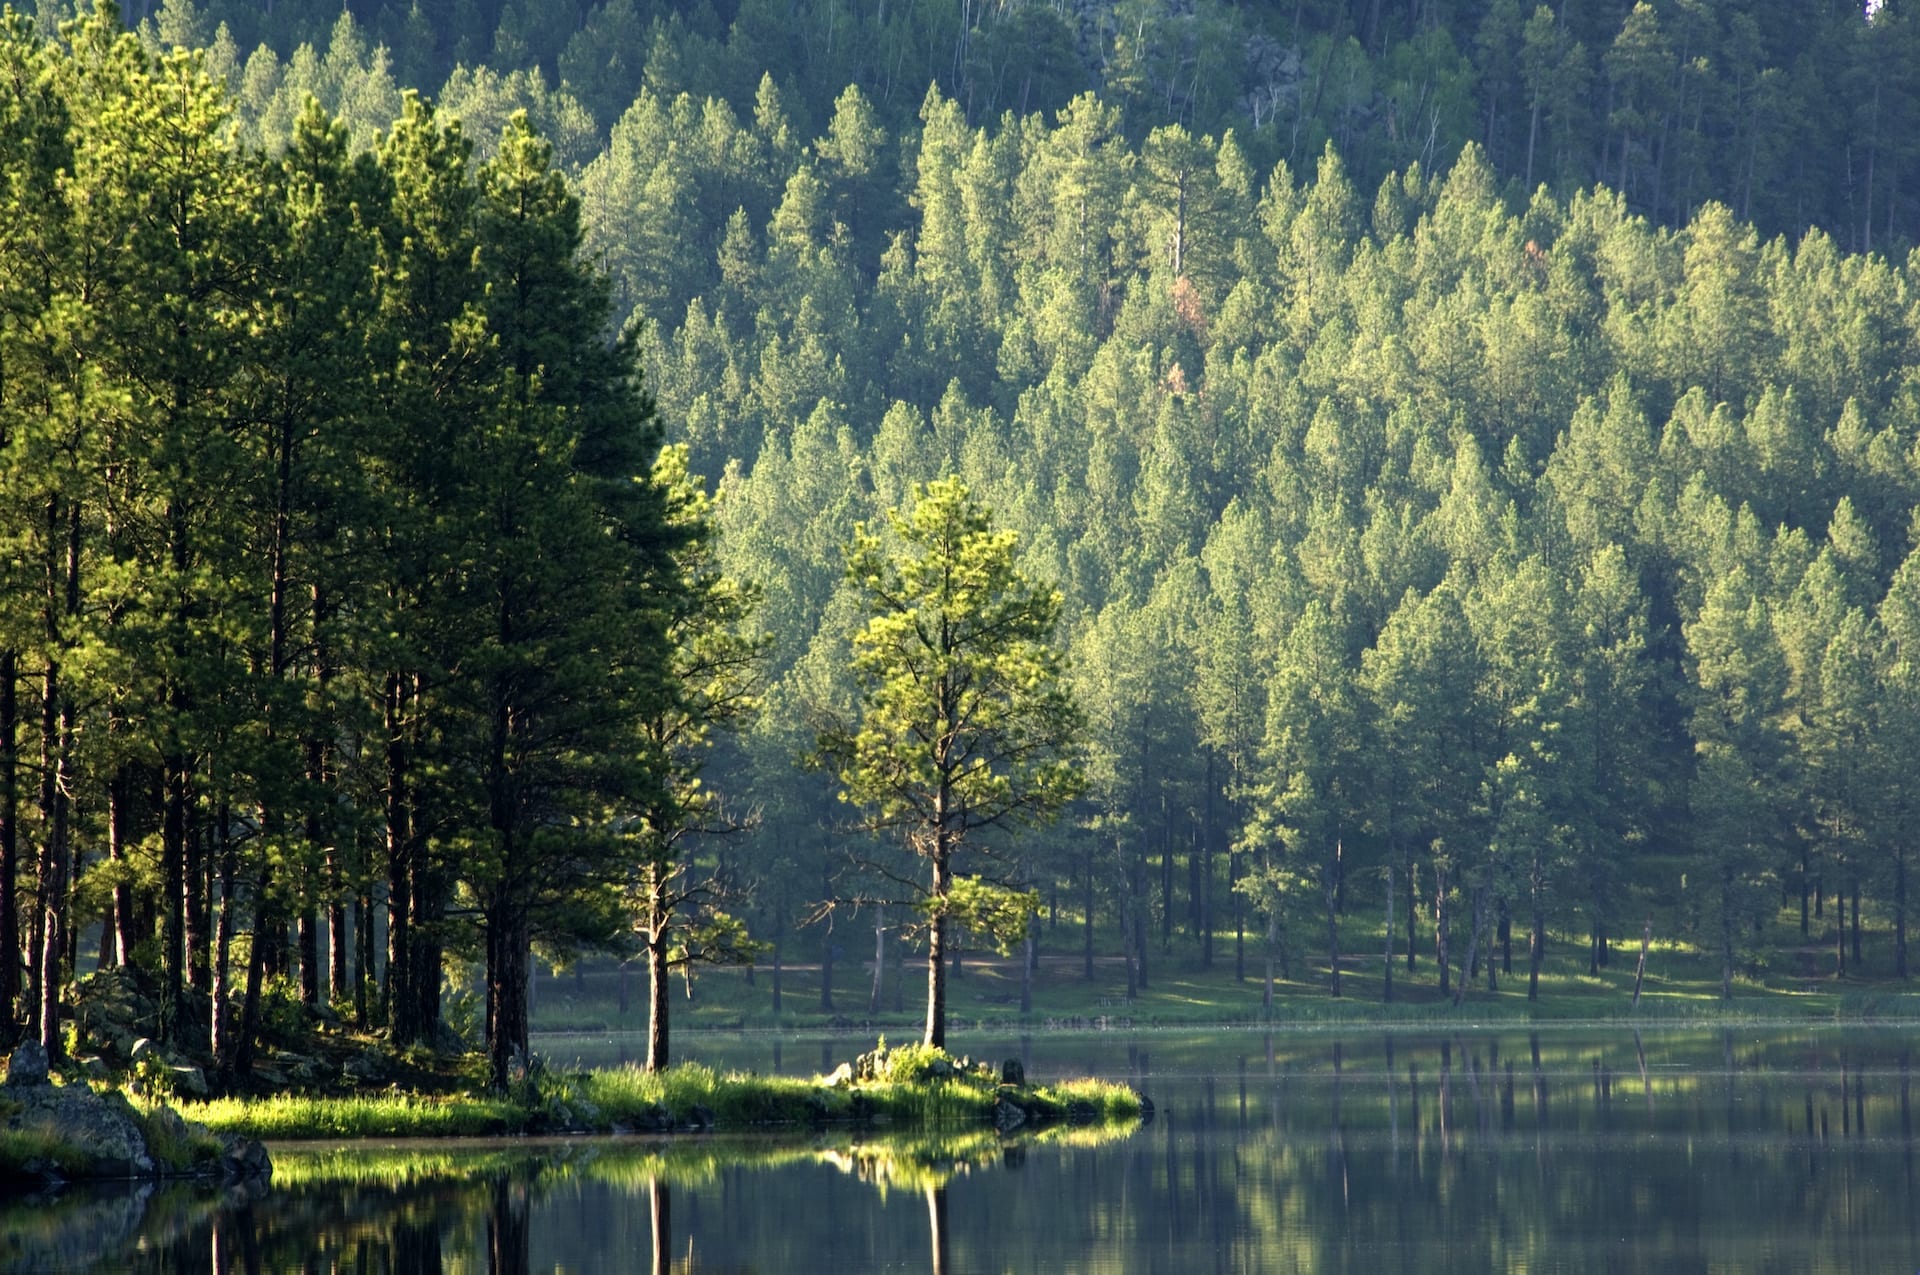 A peacefully calm lake with pine trees on the banks. 